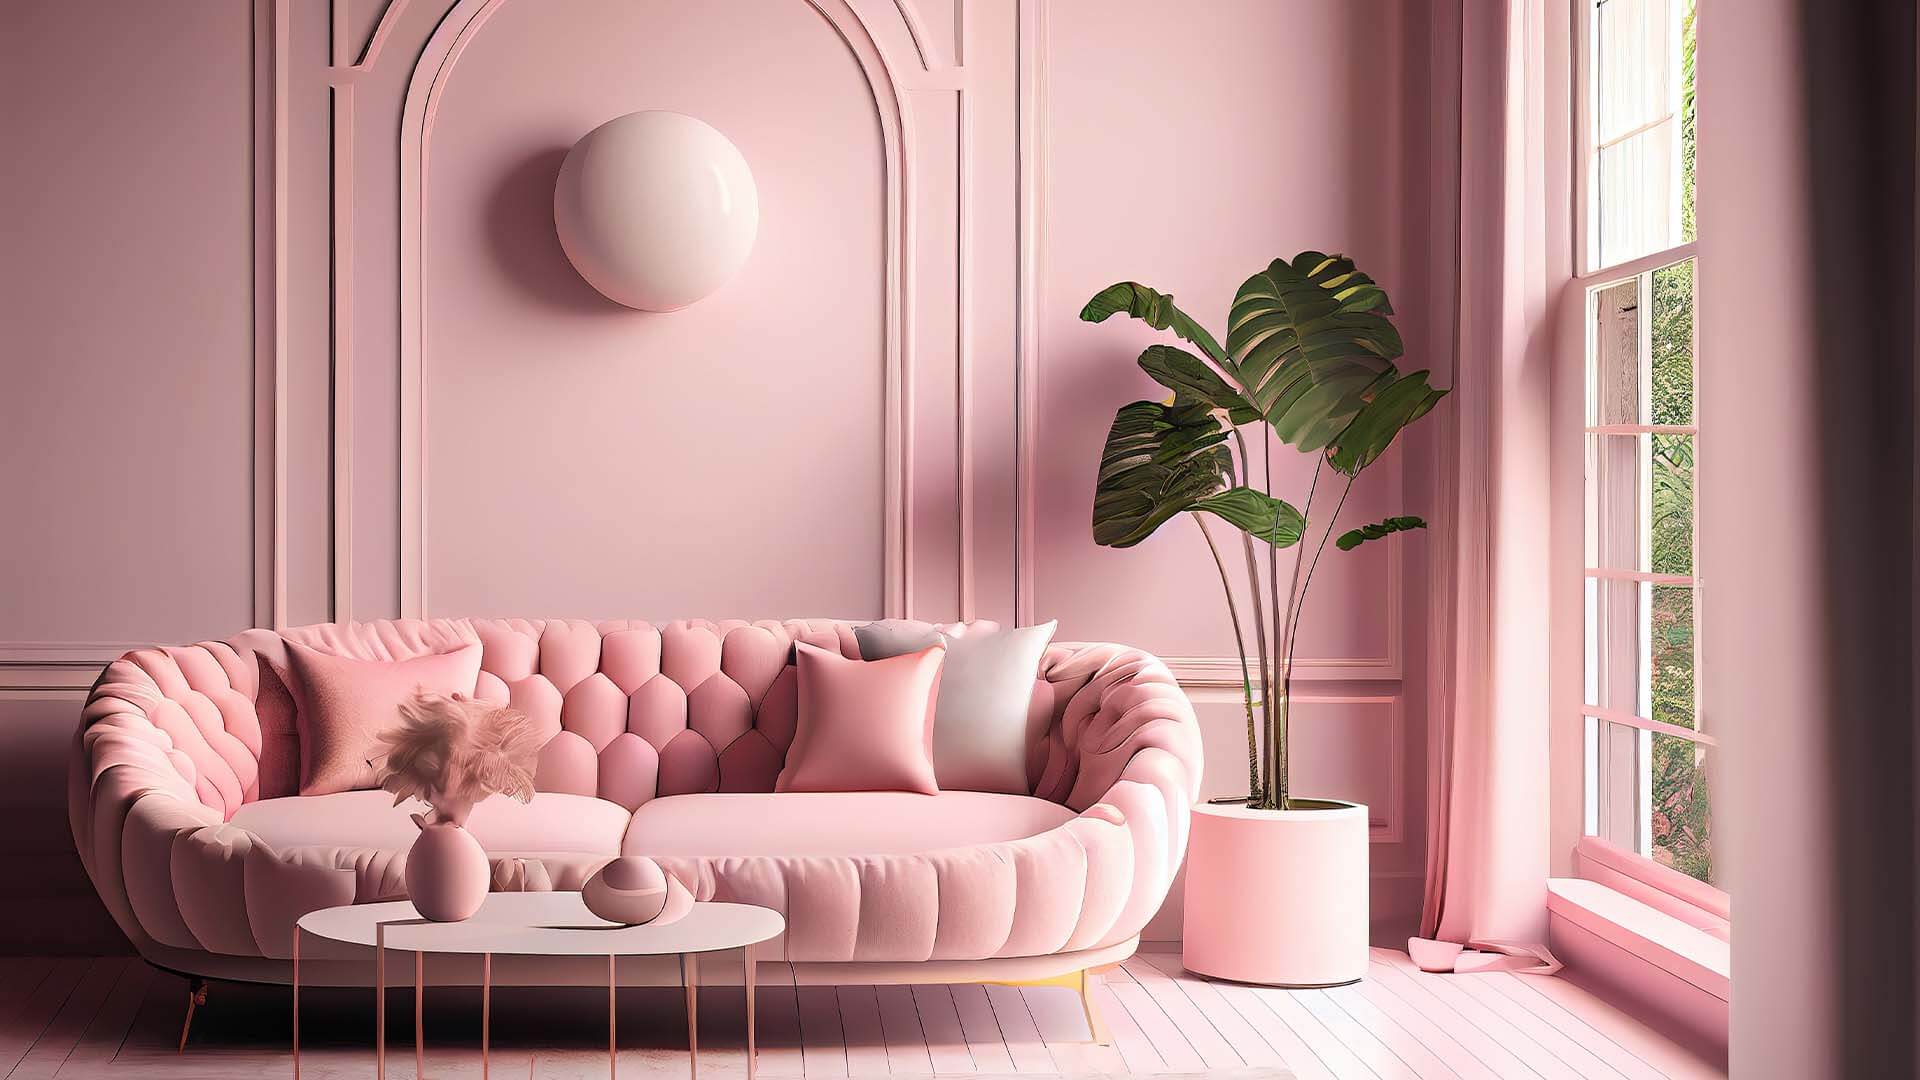 Dreamhouse: How to Weave the Fuchsia Fantasy Into Your Home - Build Magazine